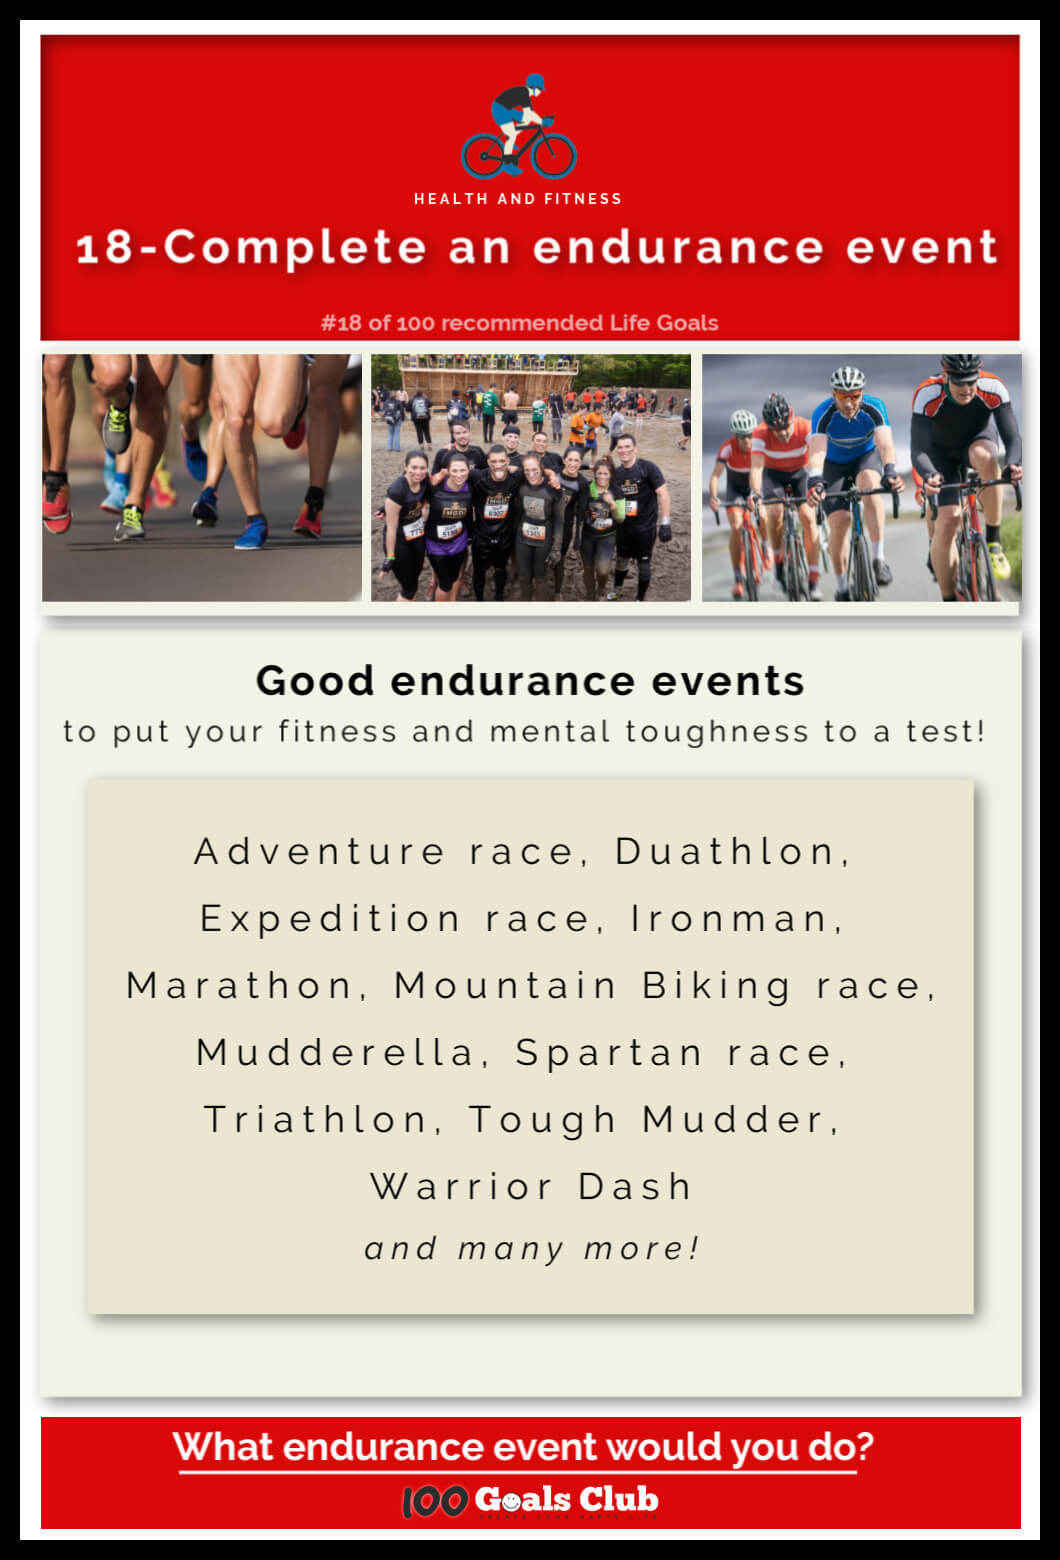 Improving your heart and aerobic health to the point that you can complete endurance events is a great way to motivate you.  An endurance race can be associated with long distance running, an ultra marathon, an adventure race, or an endurance foot race.